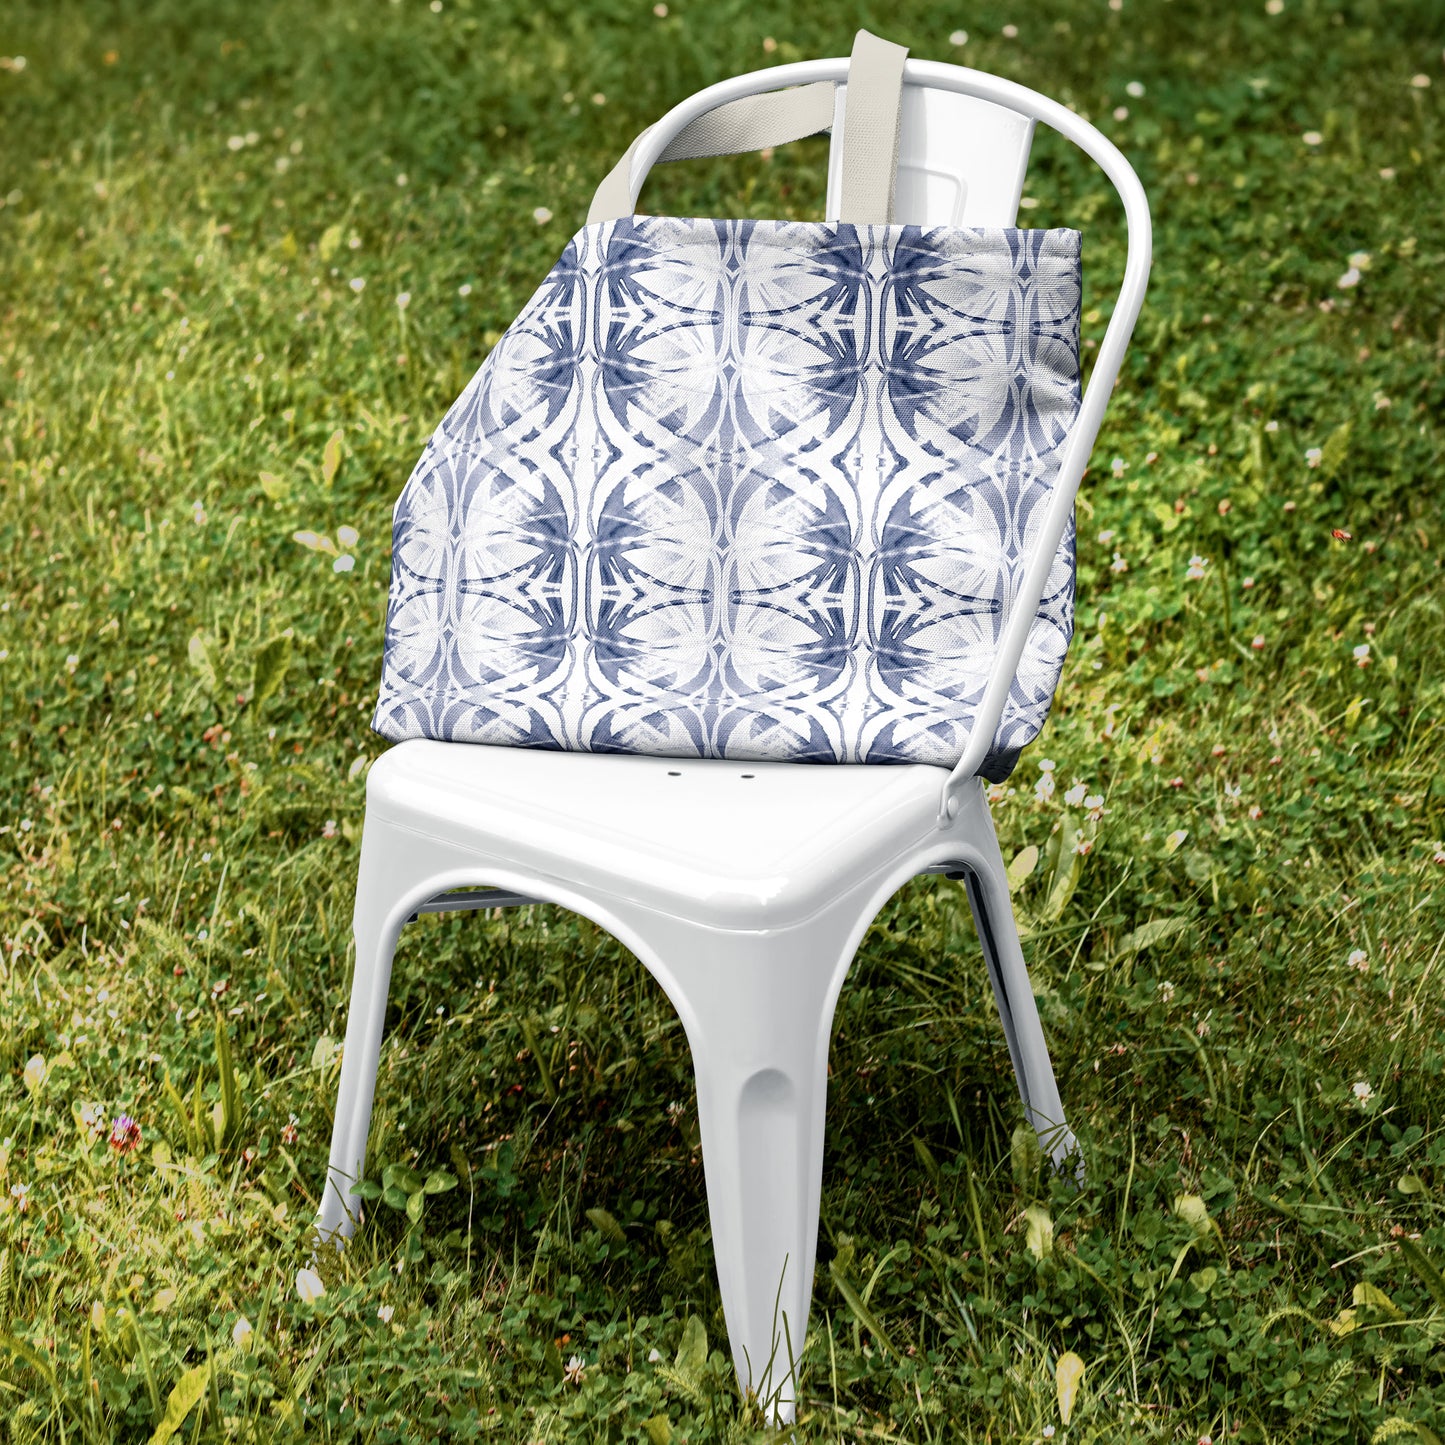 Blue and white pattern tote bag sitting on a white metal chair in green grass